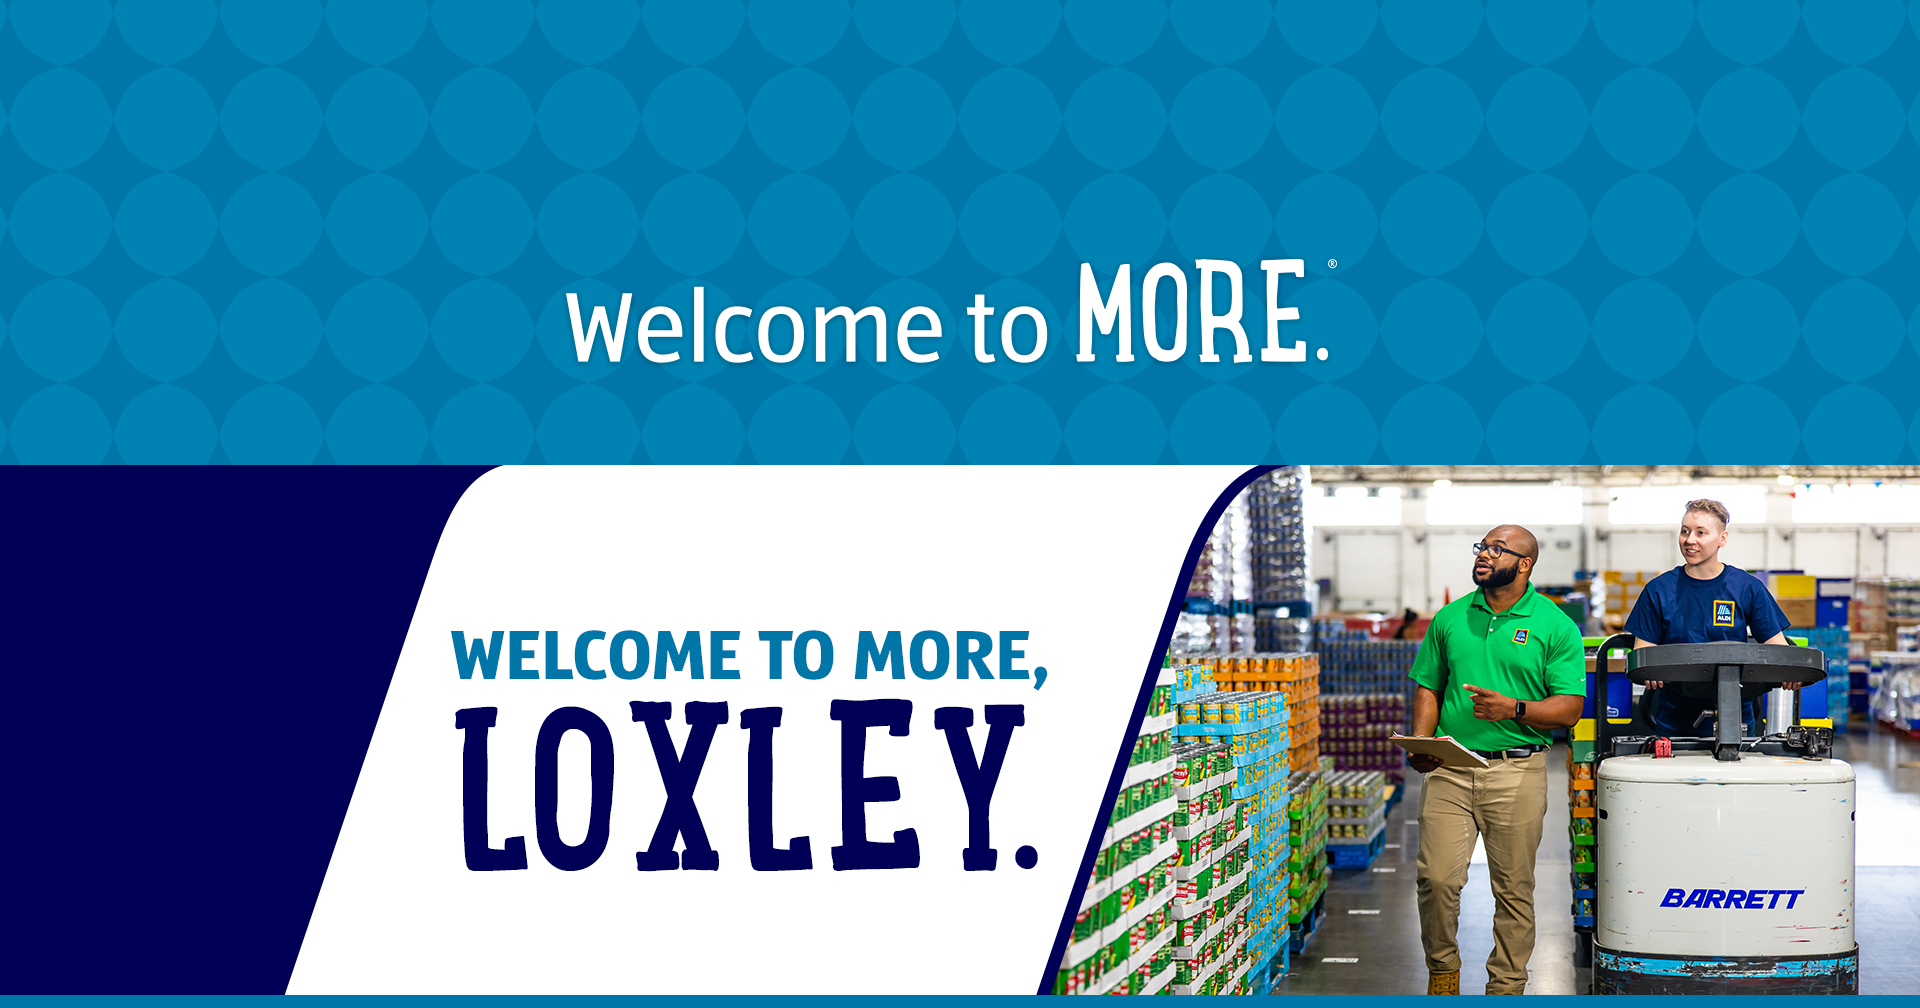 Welcome to More, Loxley.